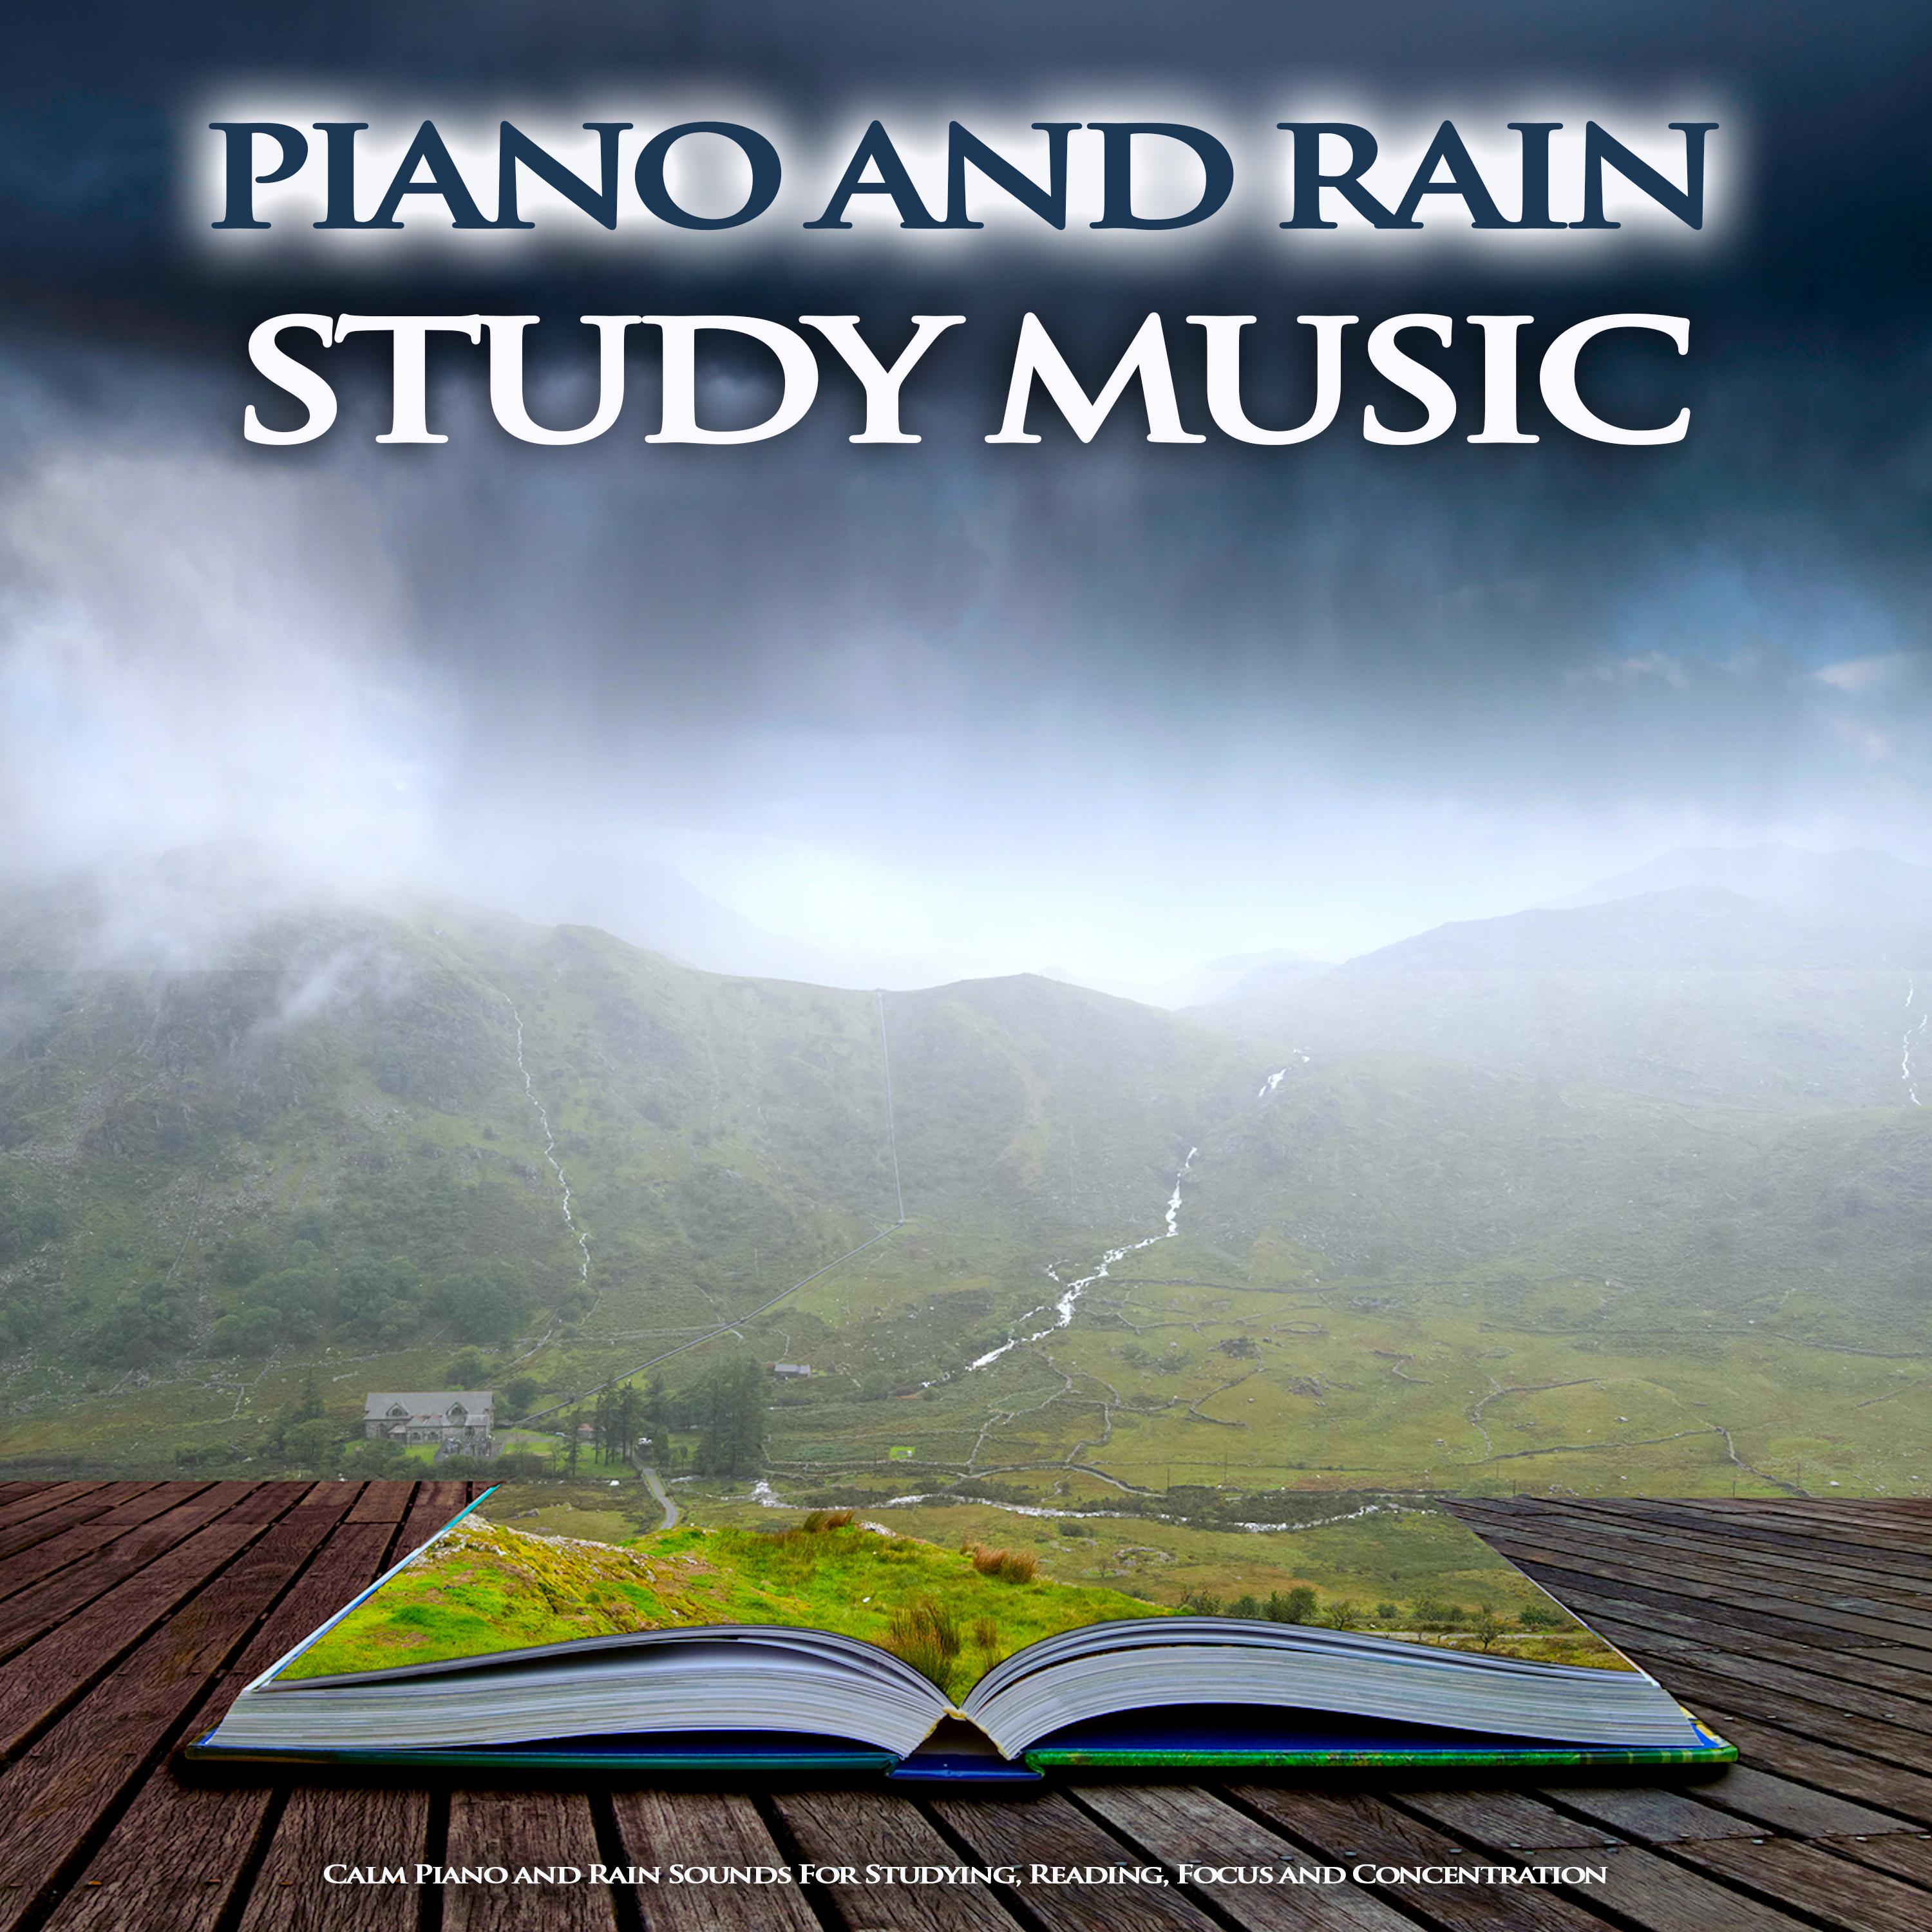 Peaceful Reading Music With Rain Sounds